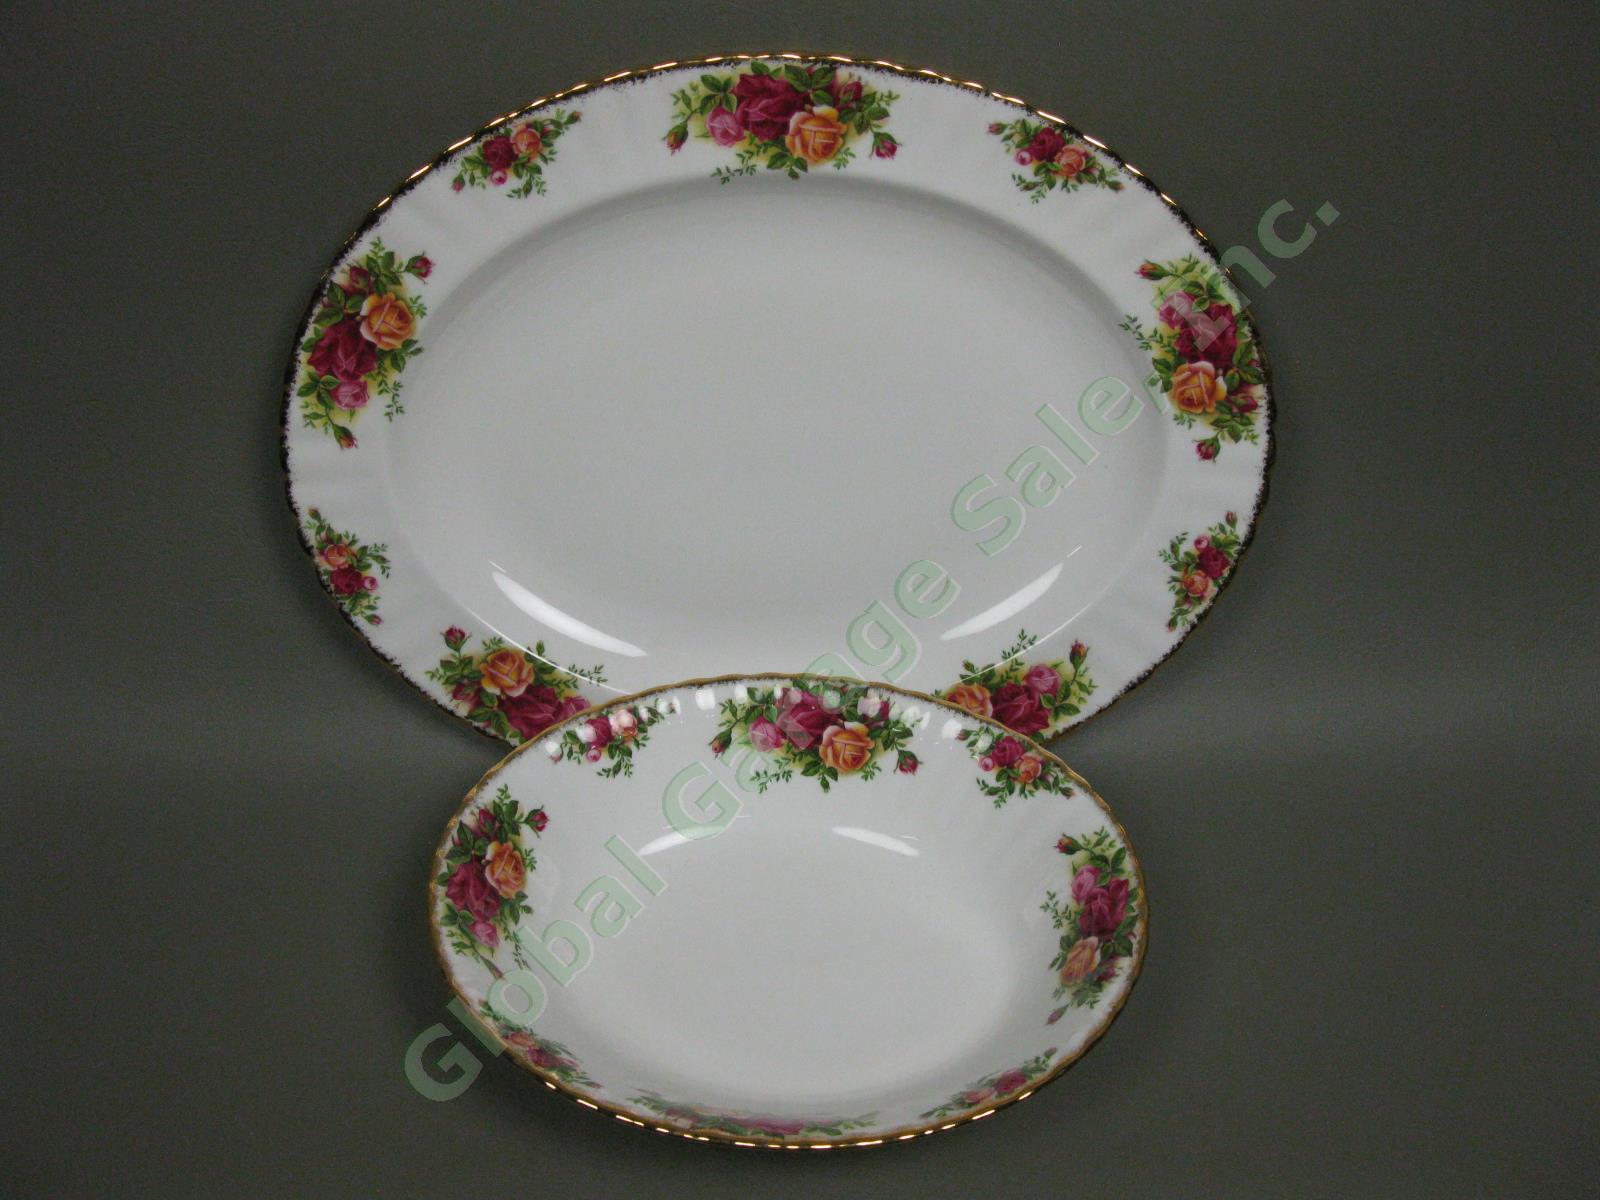 4 Royal Albert Old Country Roses Place Settings Serving Bowl Platter Plate Set 9